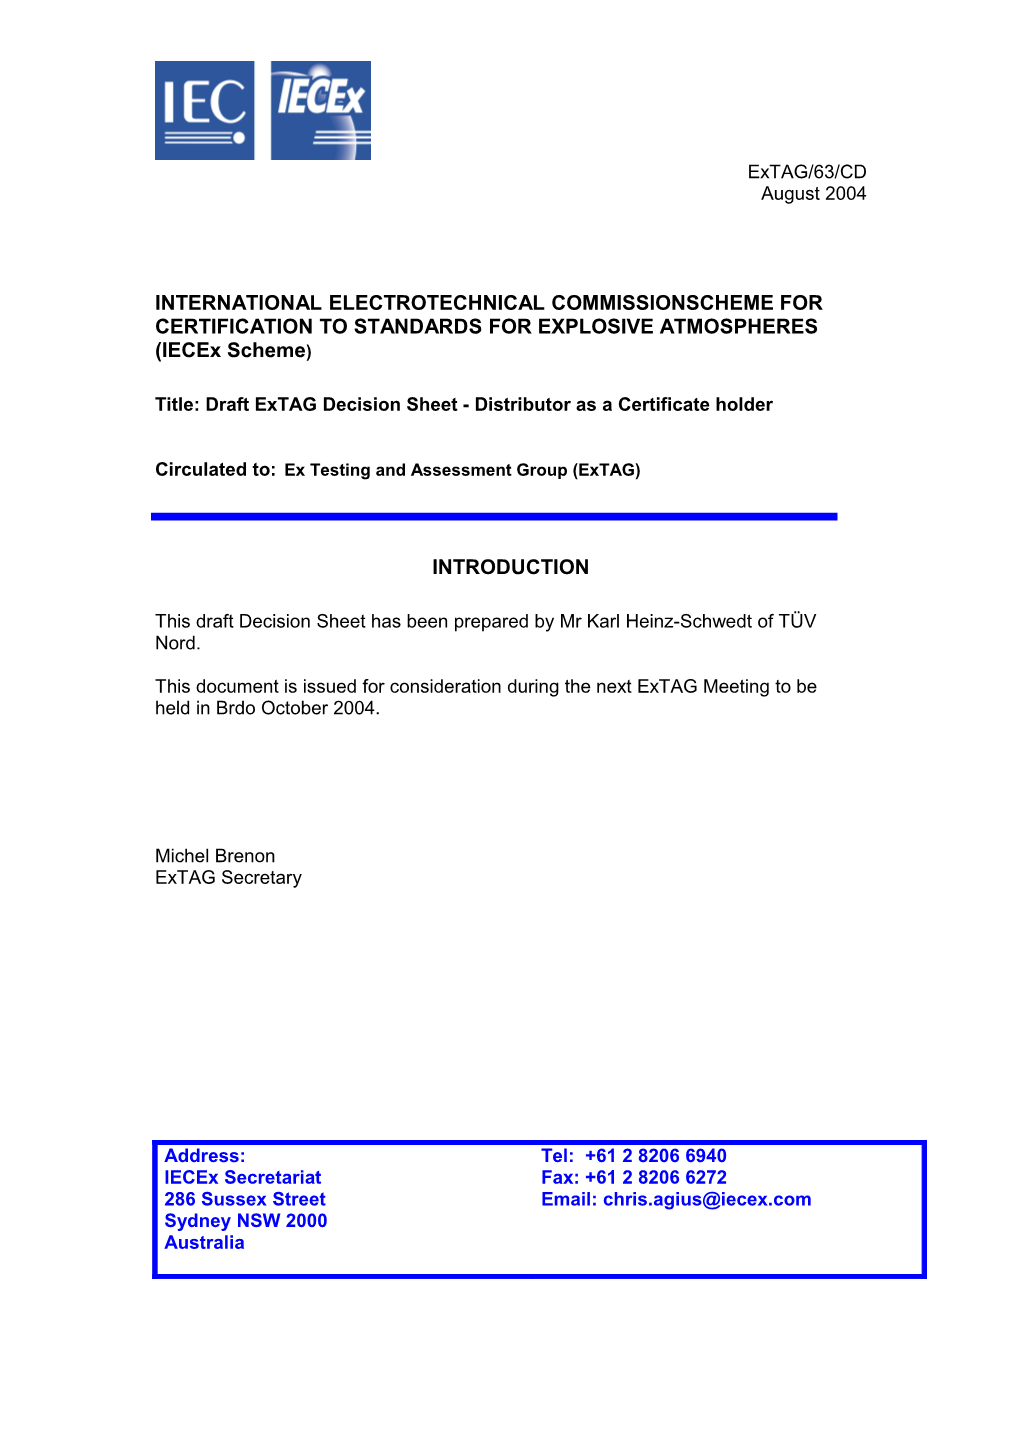 International Electrotechnical Commissionscheme for Certification to Standards for Explosive